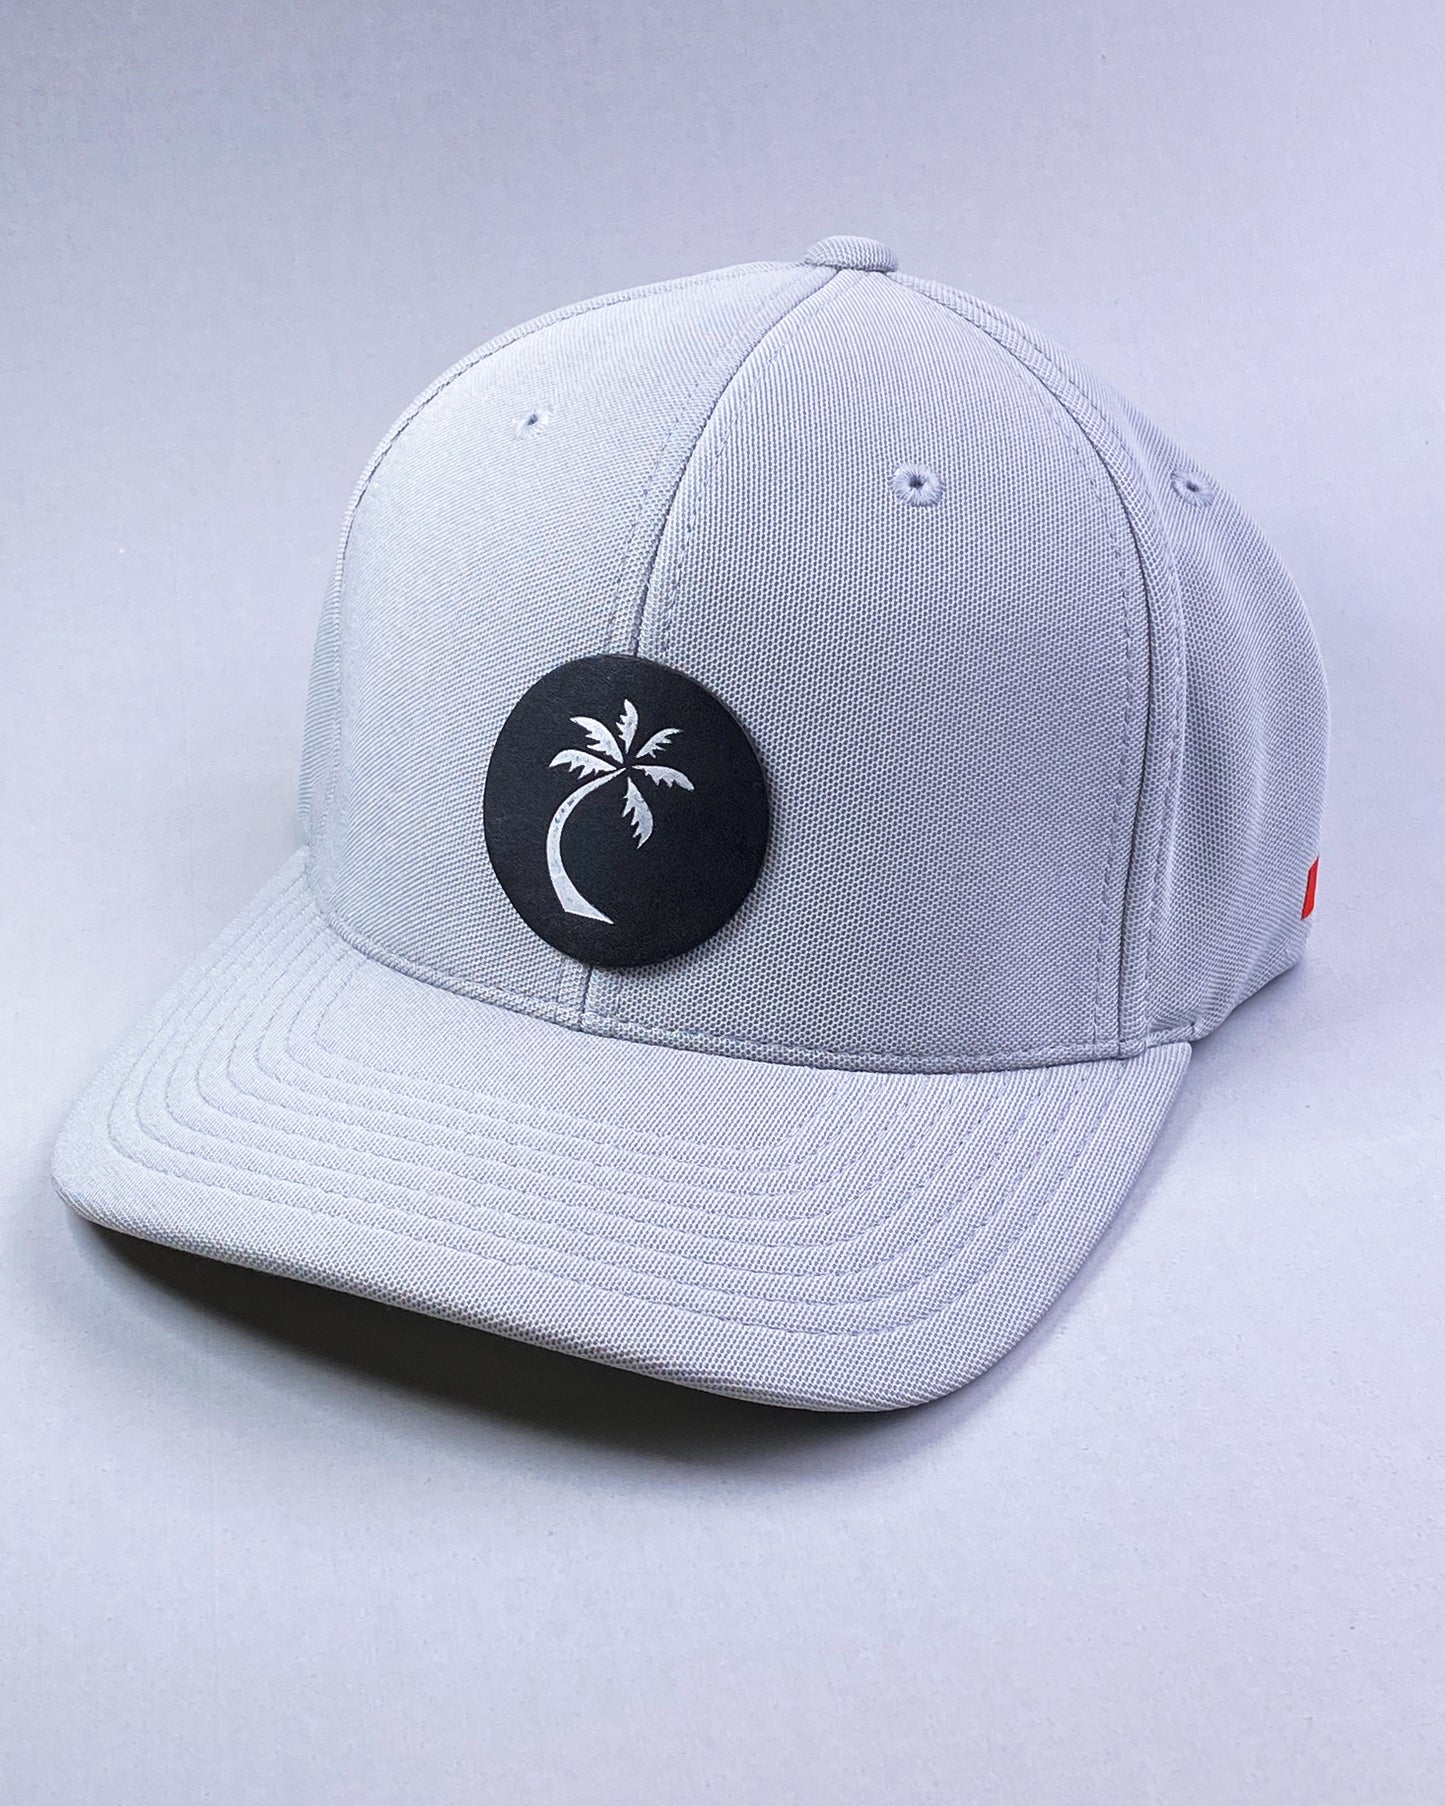 Bravo Premium hat in silver grey with single palm design leather patch